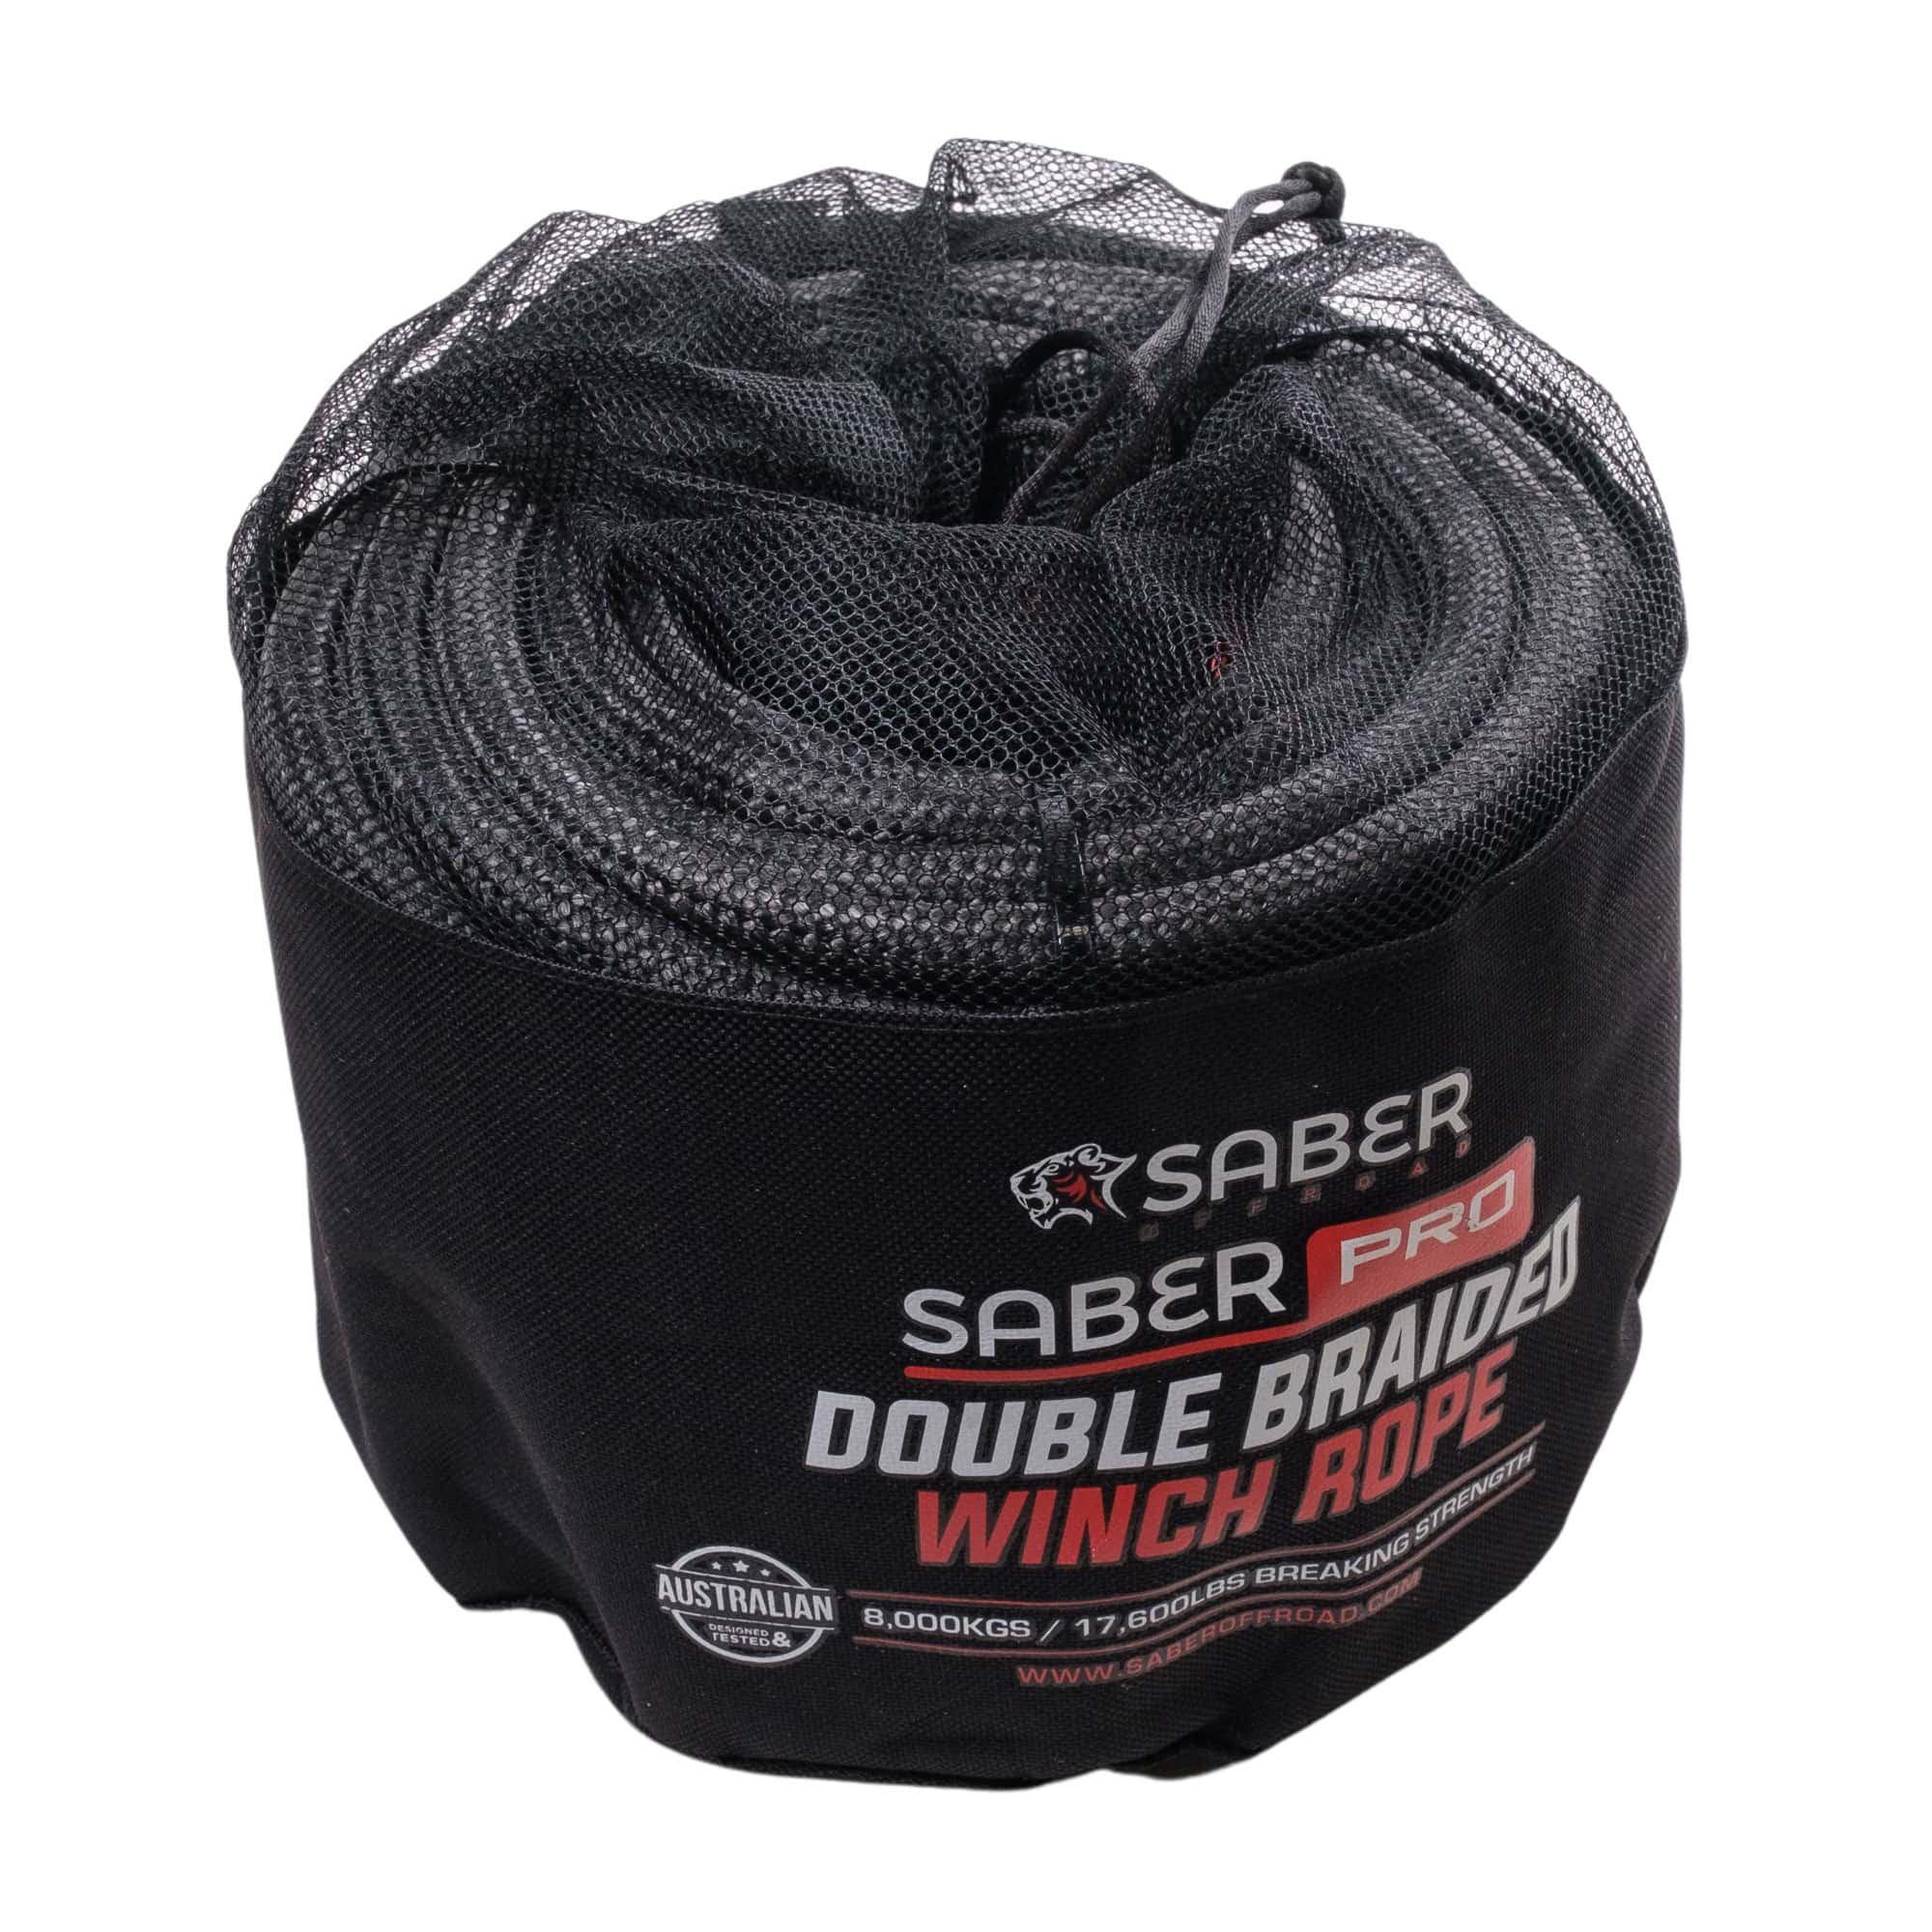 SaberPro Double Braided 30M Winch Rope - Blue